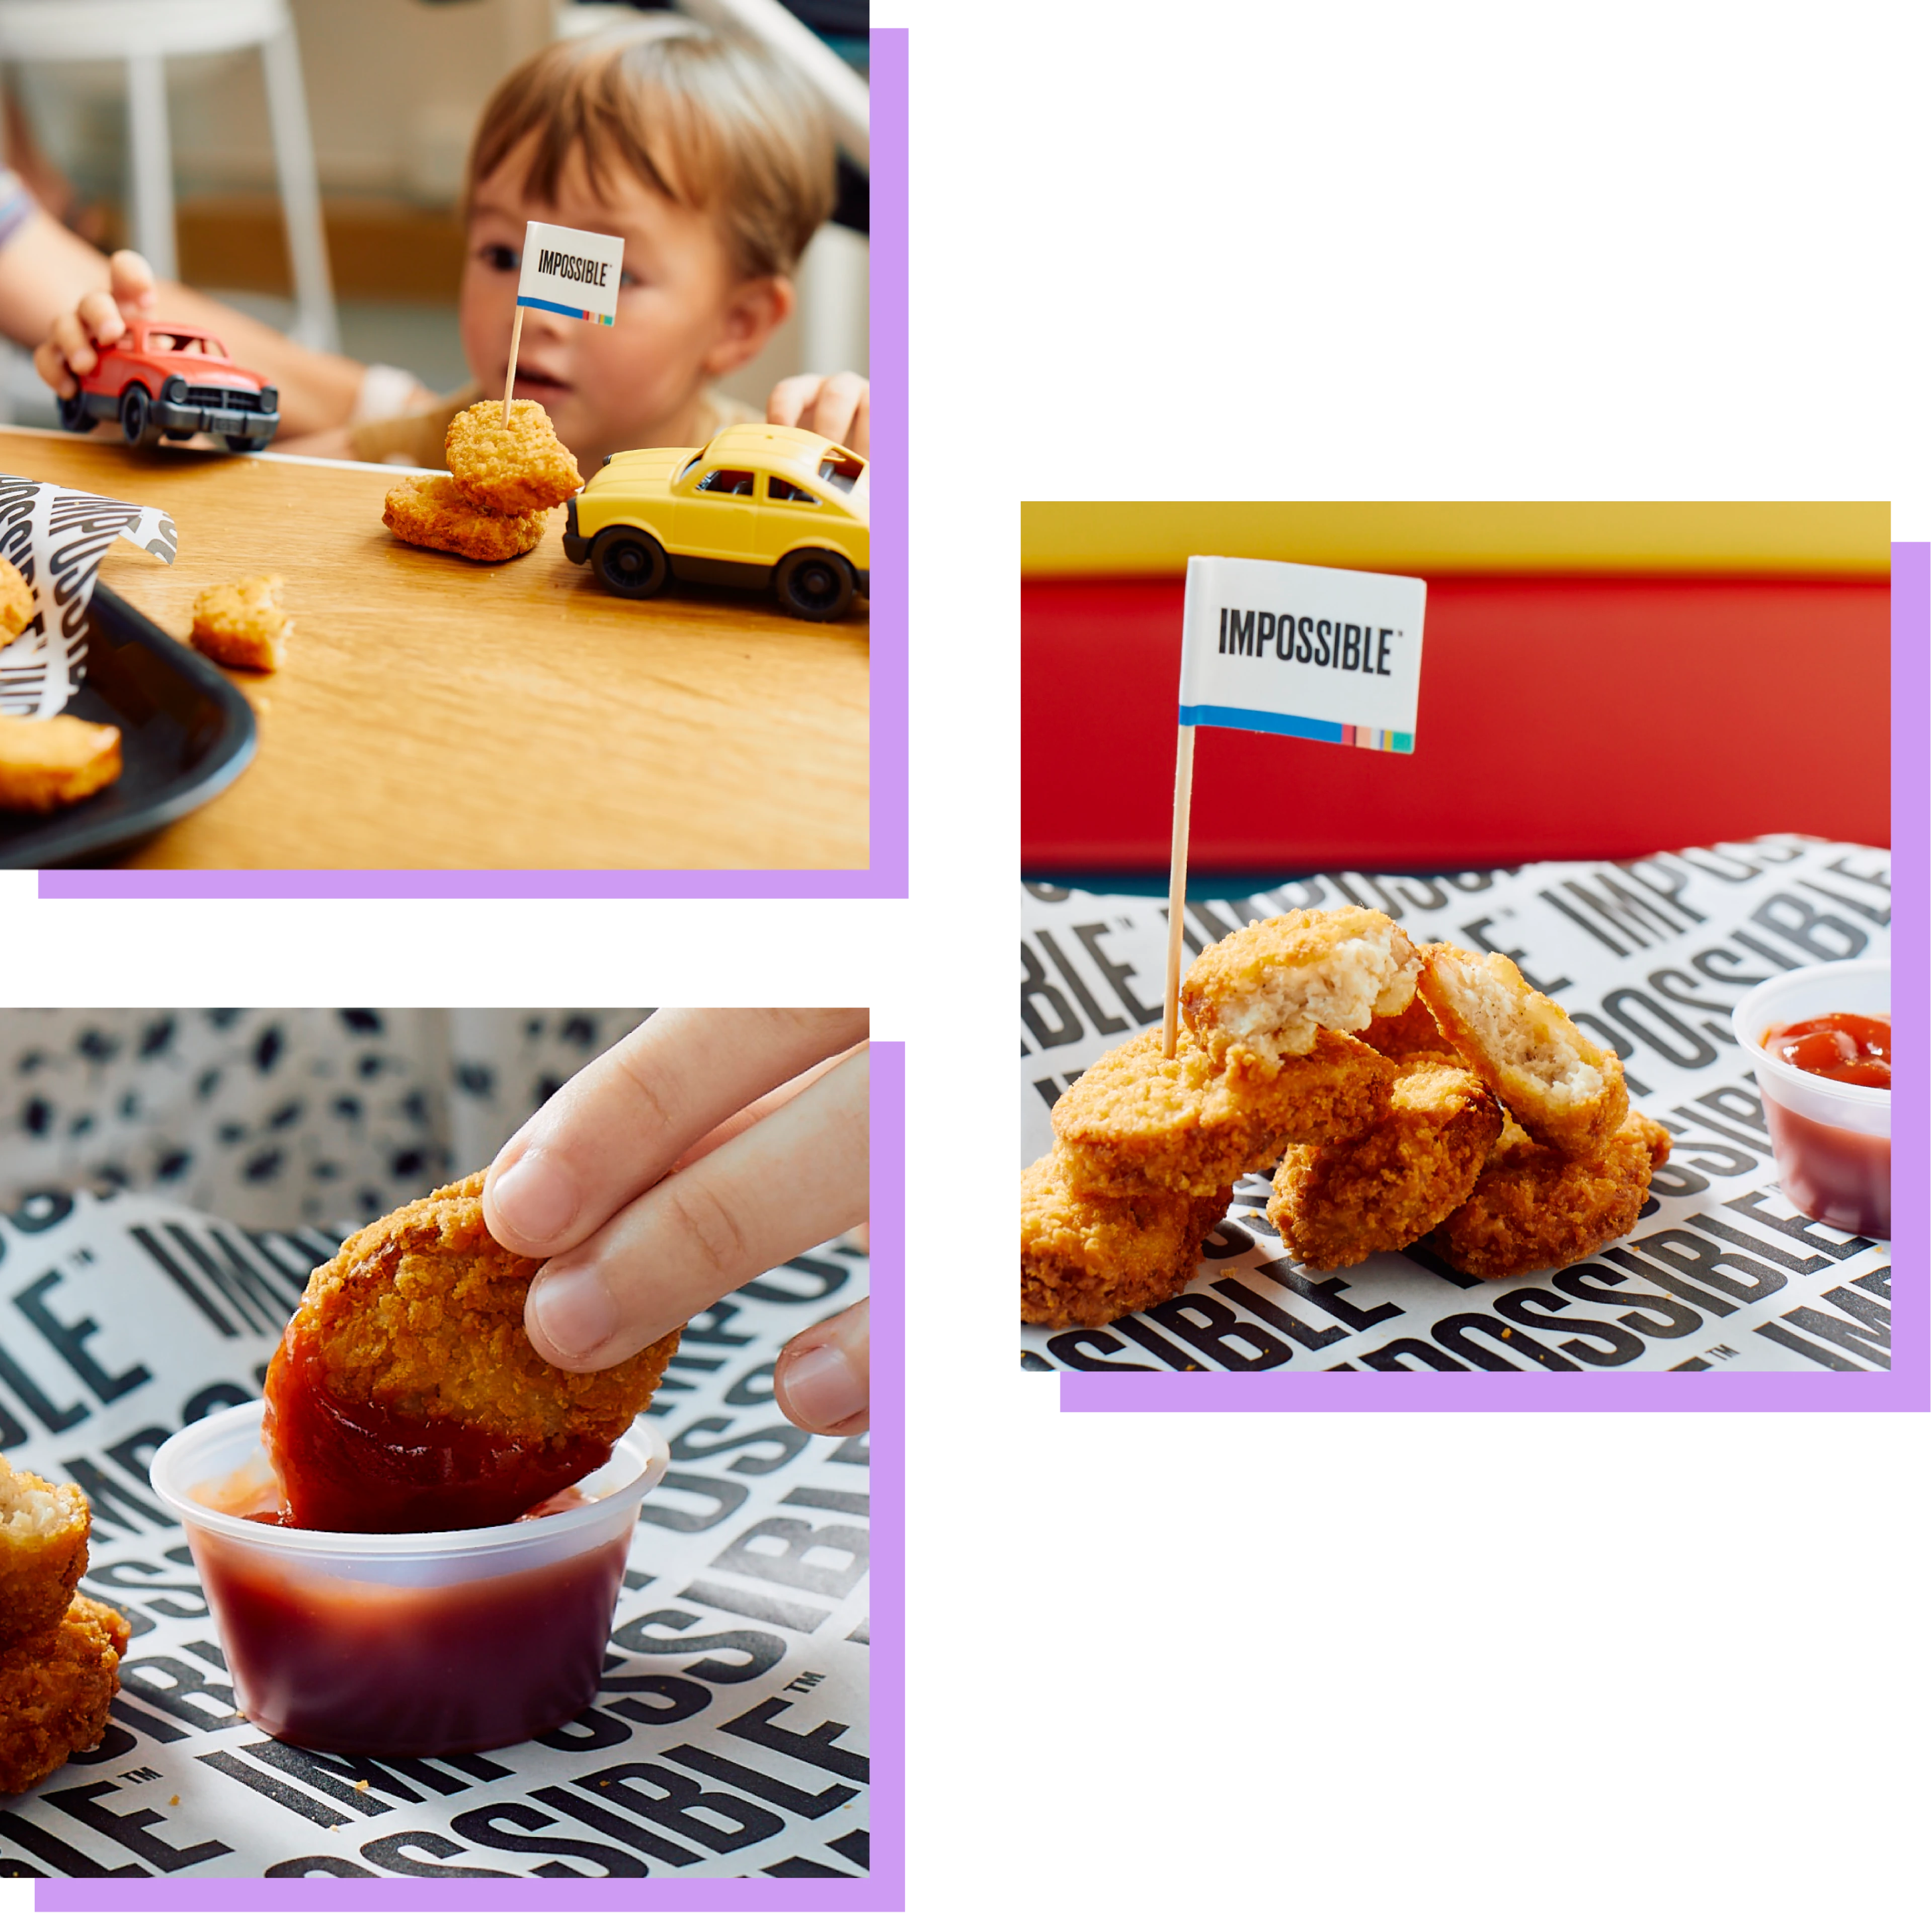 Trio of images featuring Impossible Chicken Nuggets: 
Image 1 shows a stack of chicken nuggets with a toothpick flag next to a container of ketchup
Image 2 shows a kid playing with toy trucks next to a stack of Impossible Chicken Nuggets with a toothpick flag 
Image 3 shows Impossible Chicken nuggets in a deep fryer basket